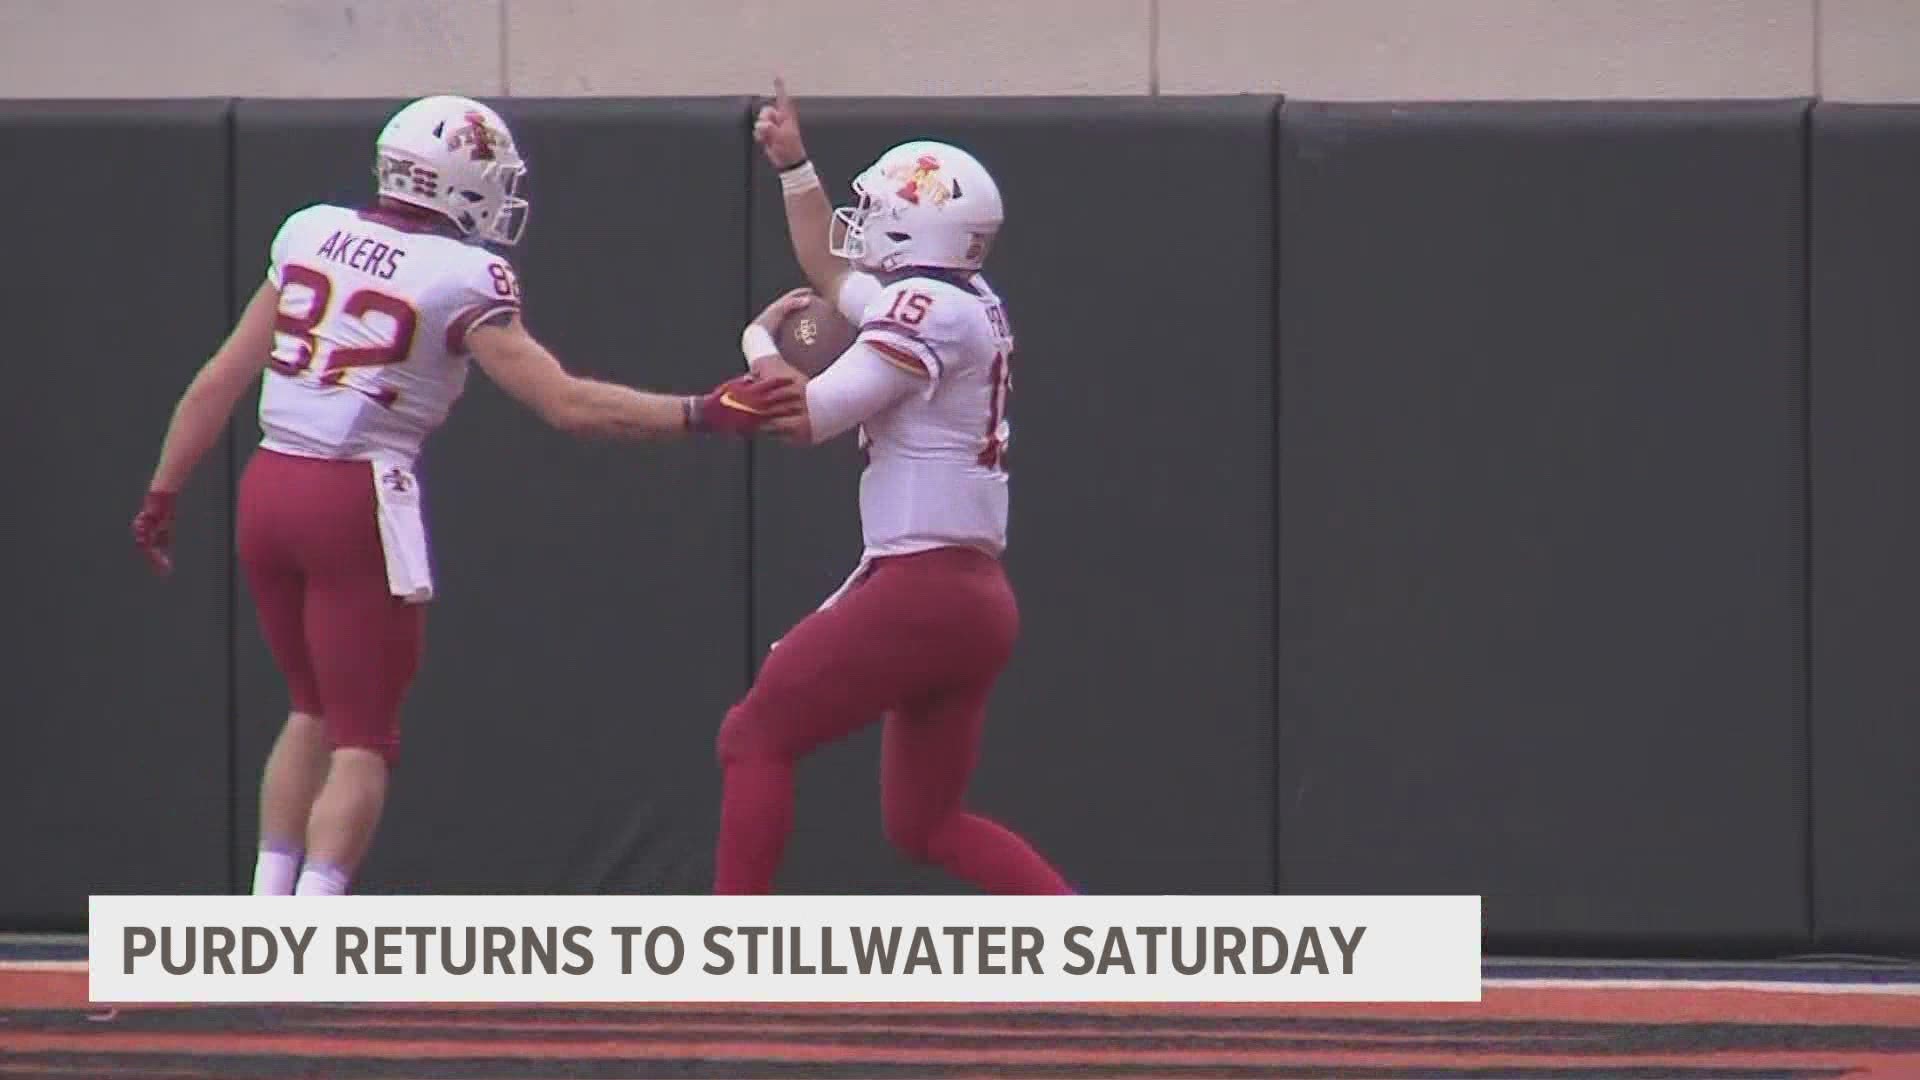 Brock Purdy broke onto the scene in 2018 against Oklahoma State. Saturday, the Cyclones return to Stillwater where it all began.